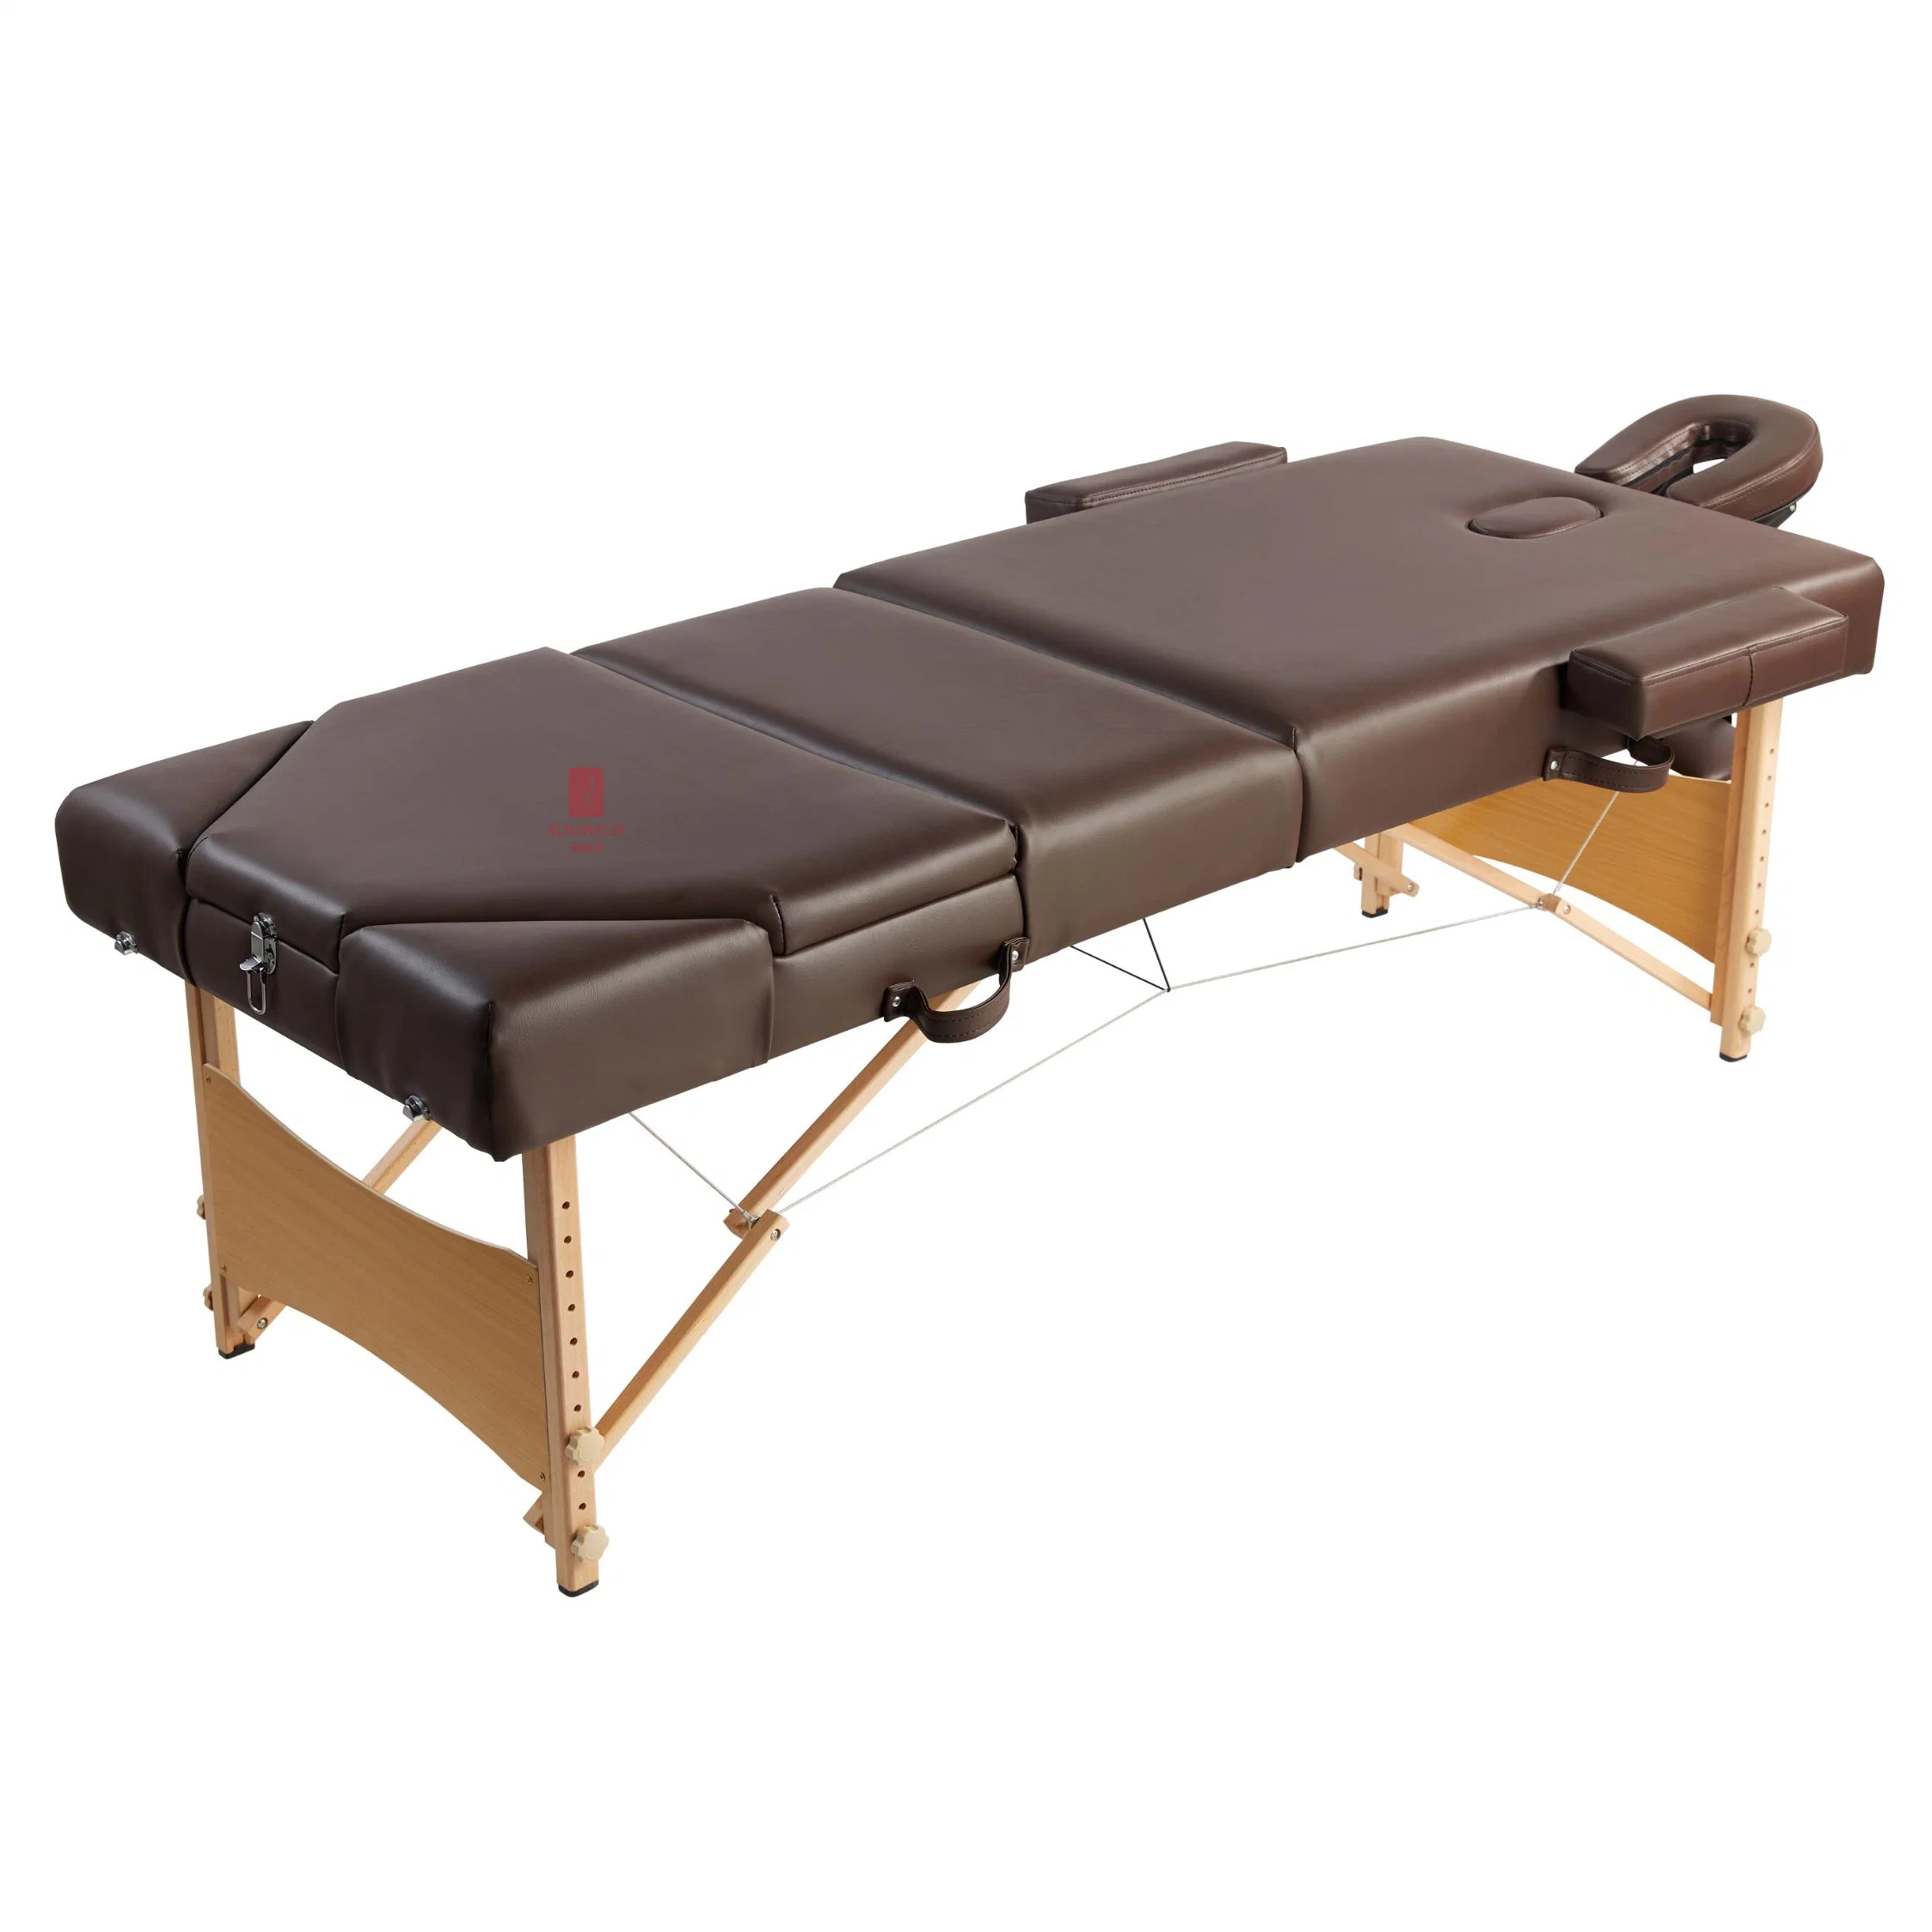 Three Fold Massage Table Portable Beauty SPA Chair Facial Bed for Beauty Salon SPA